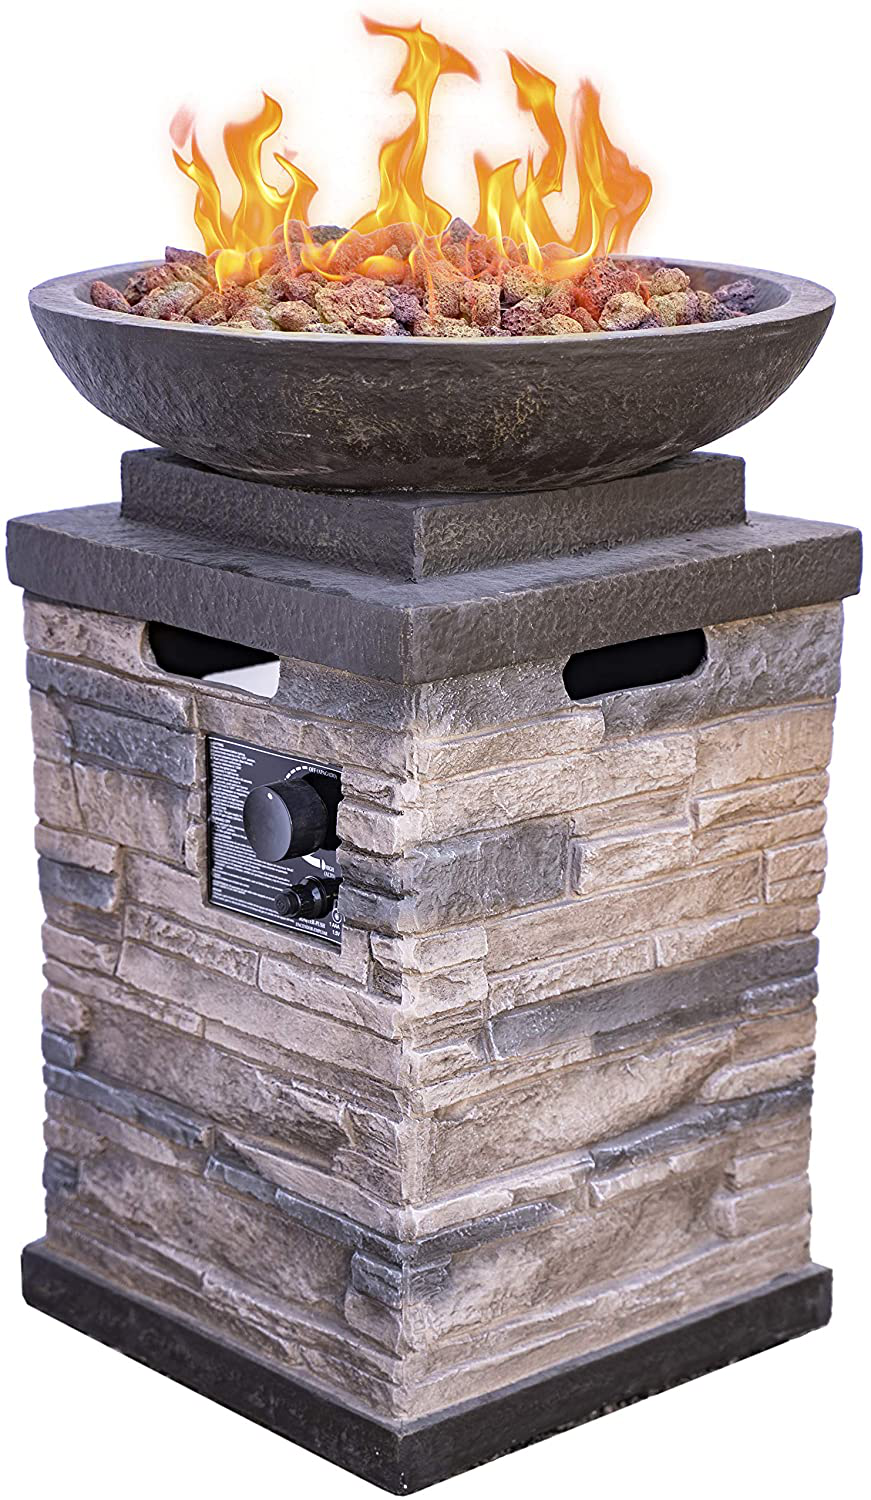 Bond Manufacturing 63172 Newcastle Propane Firebowl Column Realistic Look Firepit Heater Lava Rock 40,000 BTU Outdoor Gas Fire Pit 20 lb, Pack of 1, Natural Stone